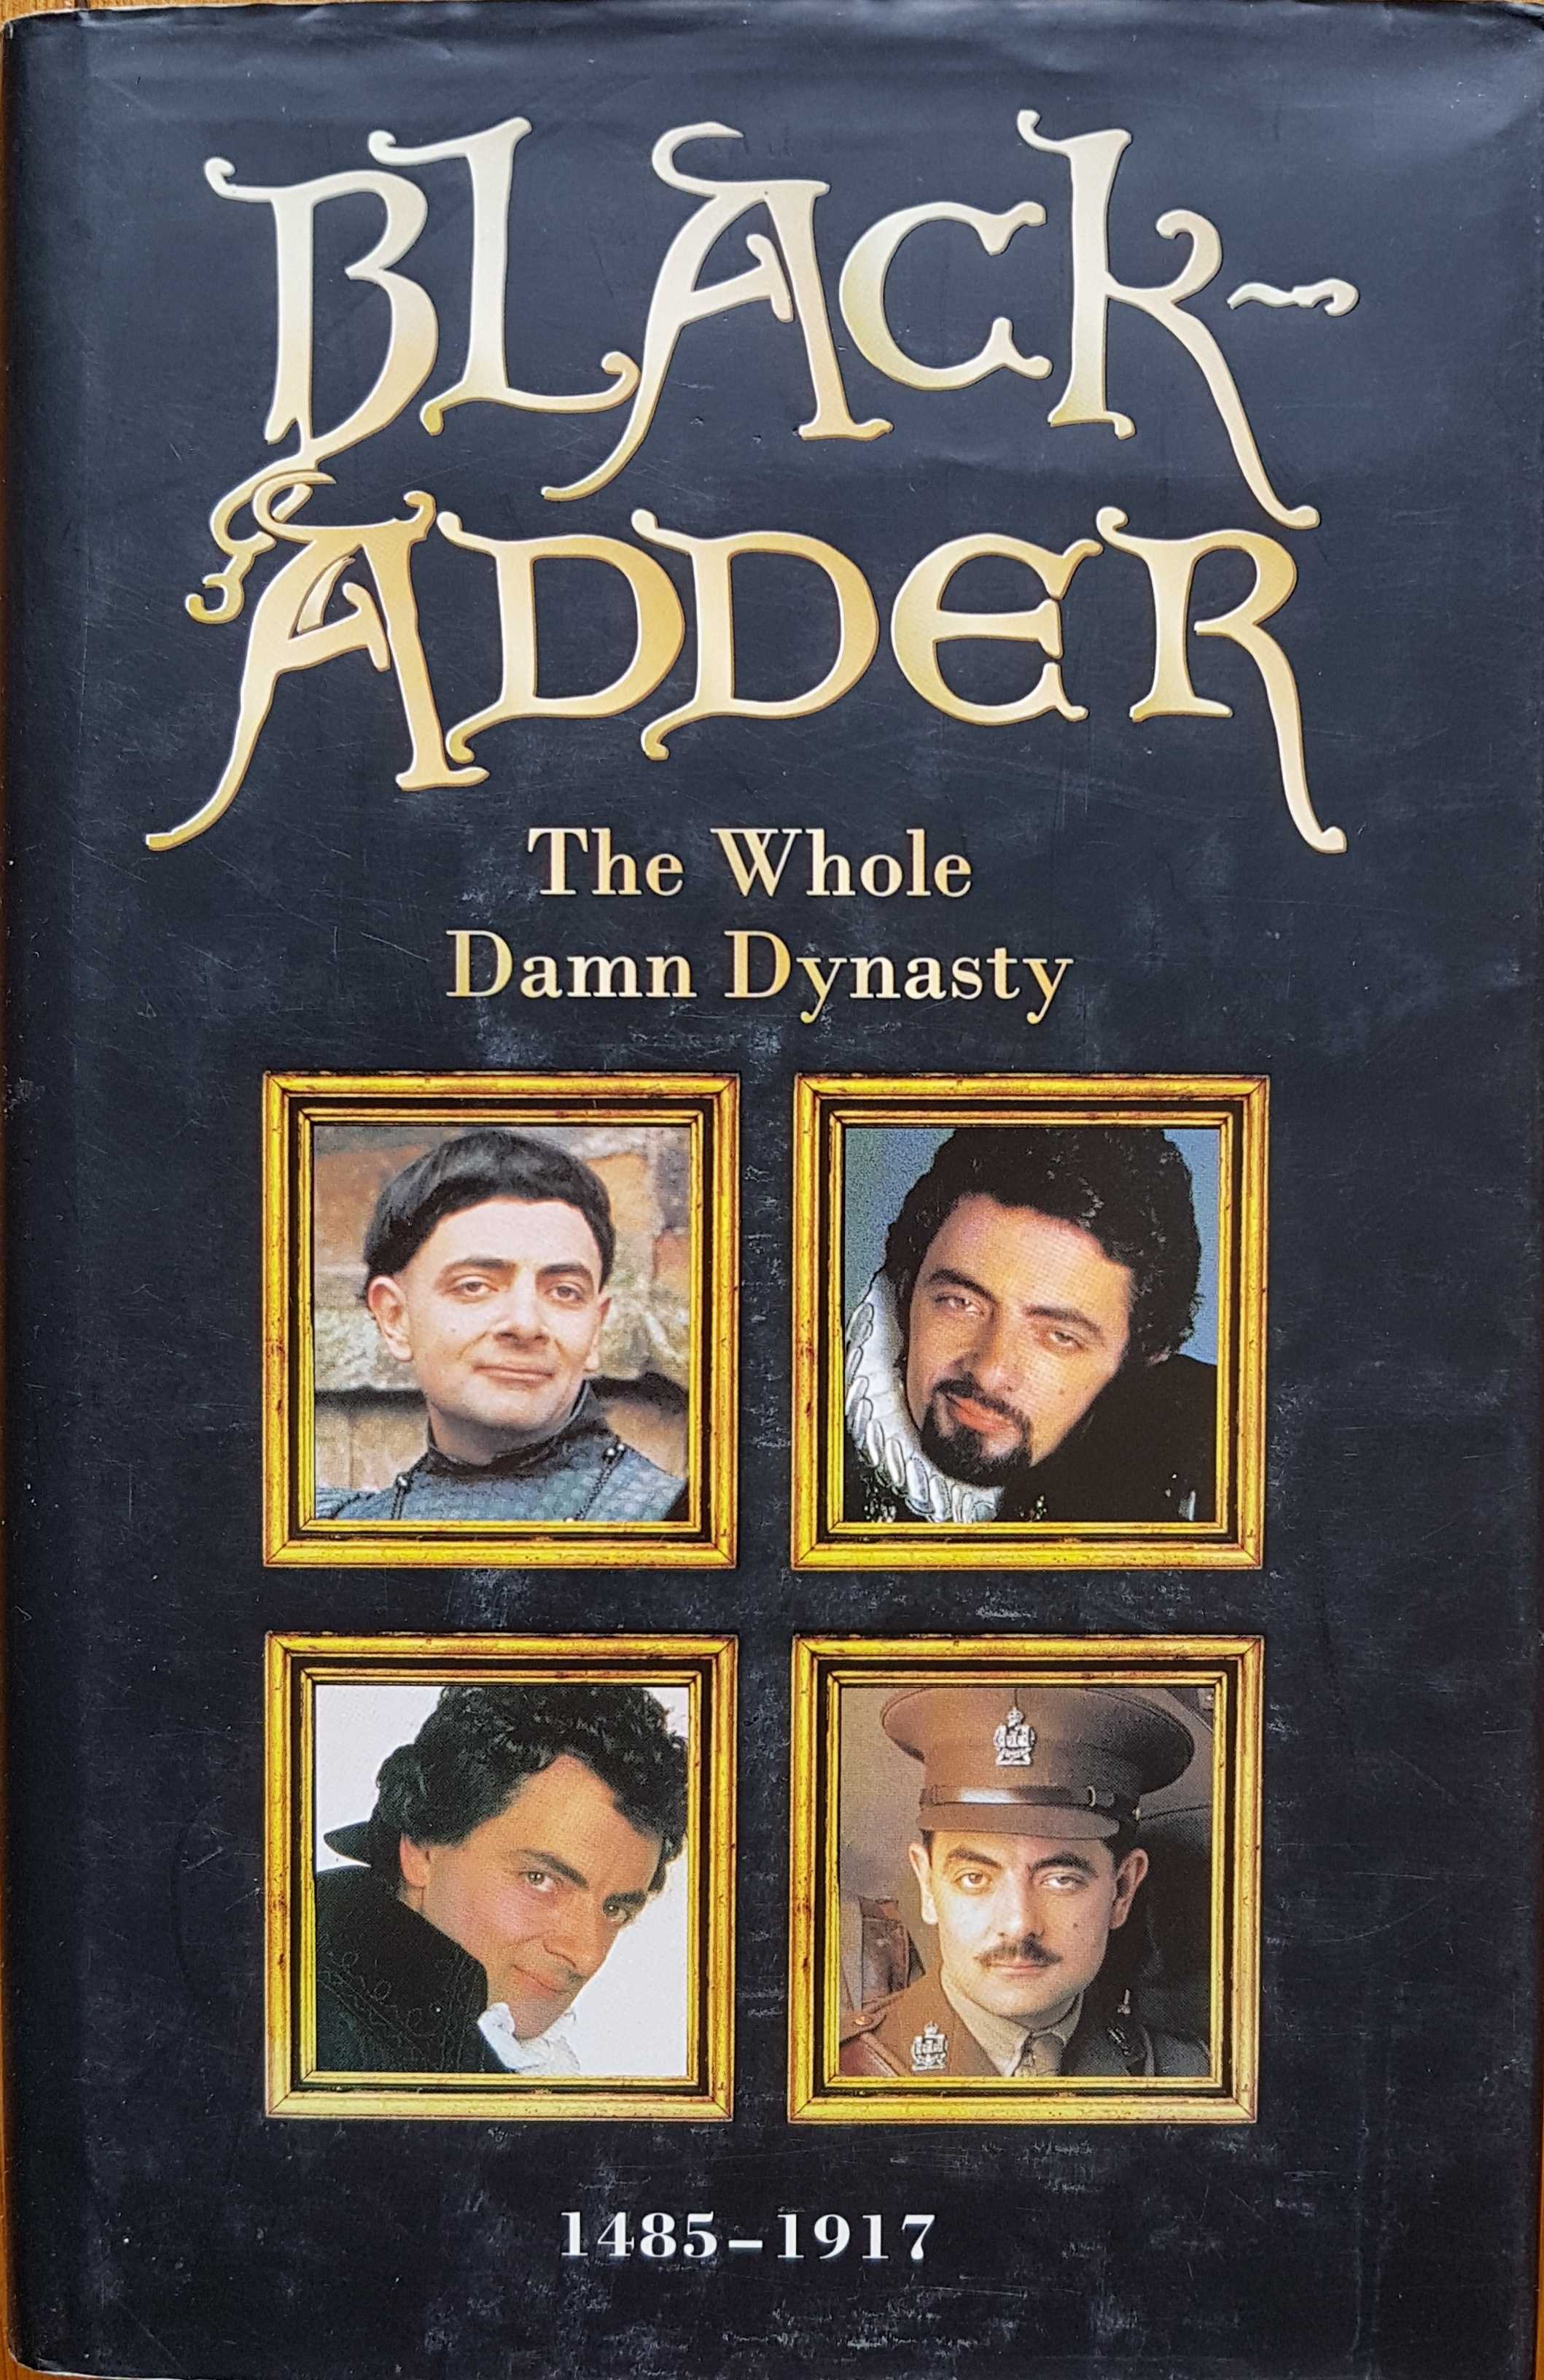 Picture of 0-7181-4372-8 Black Adder - The whole damn dynasty by artist Ben Elton / John Lloyd / Richard Curtis / Rowan Atkinson from the BBC books - Records and Tapes library